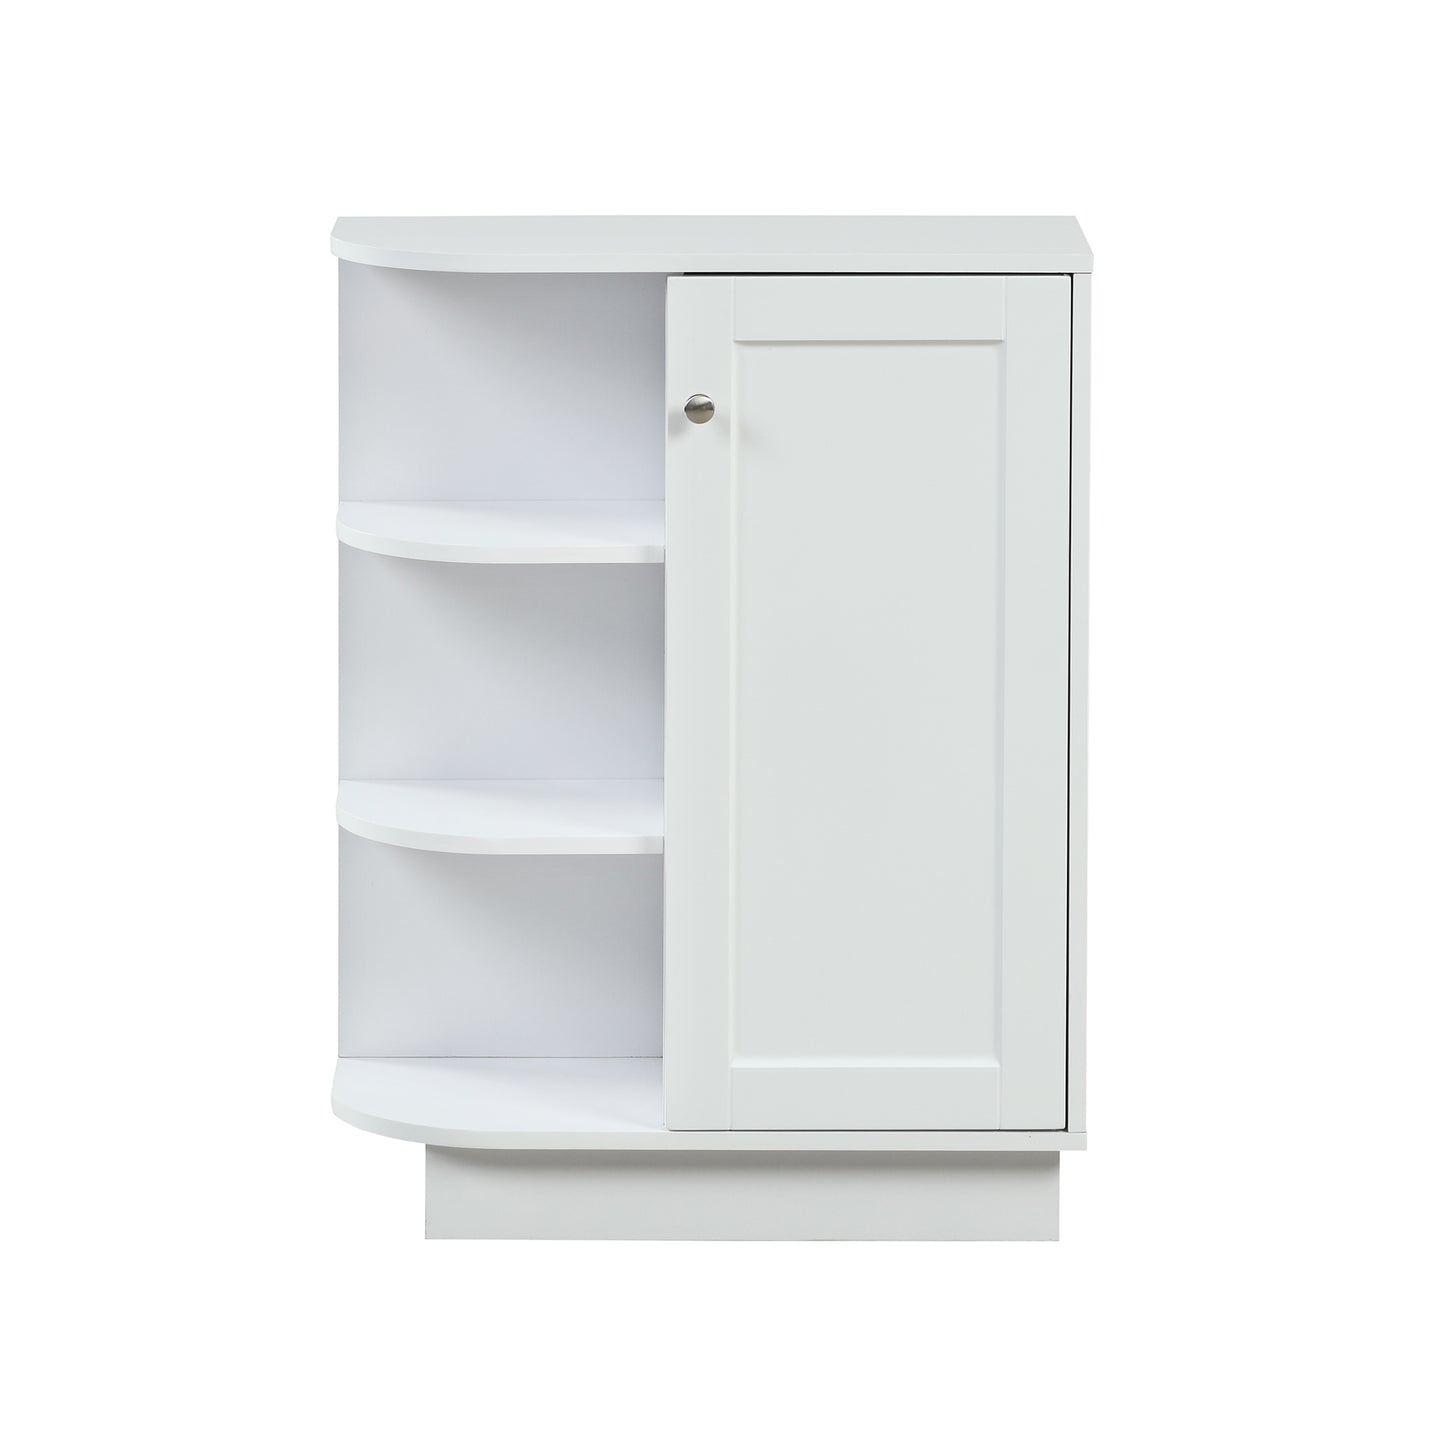 Open Style Shelf Cabinet with Adjustable Plates Ample Storage Space Easy to Assemble, White